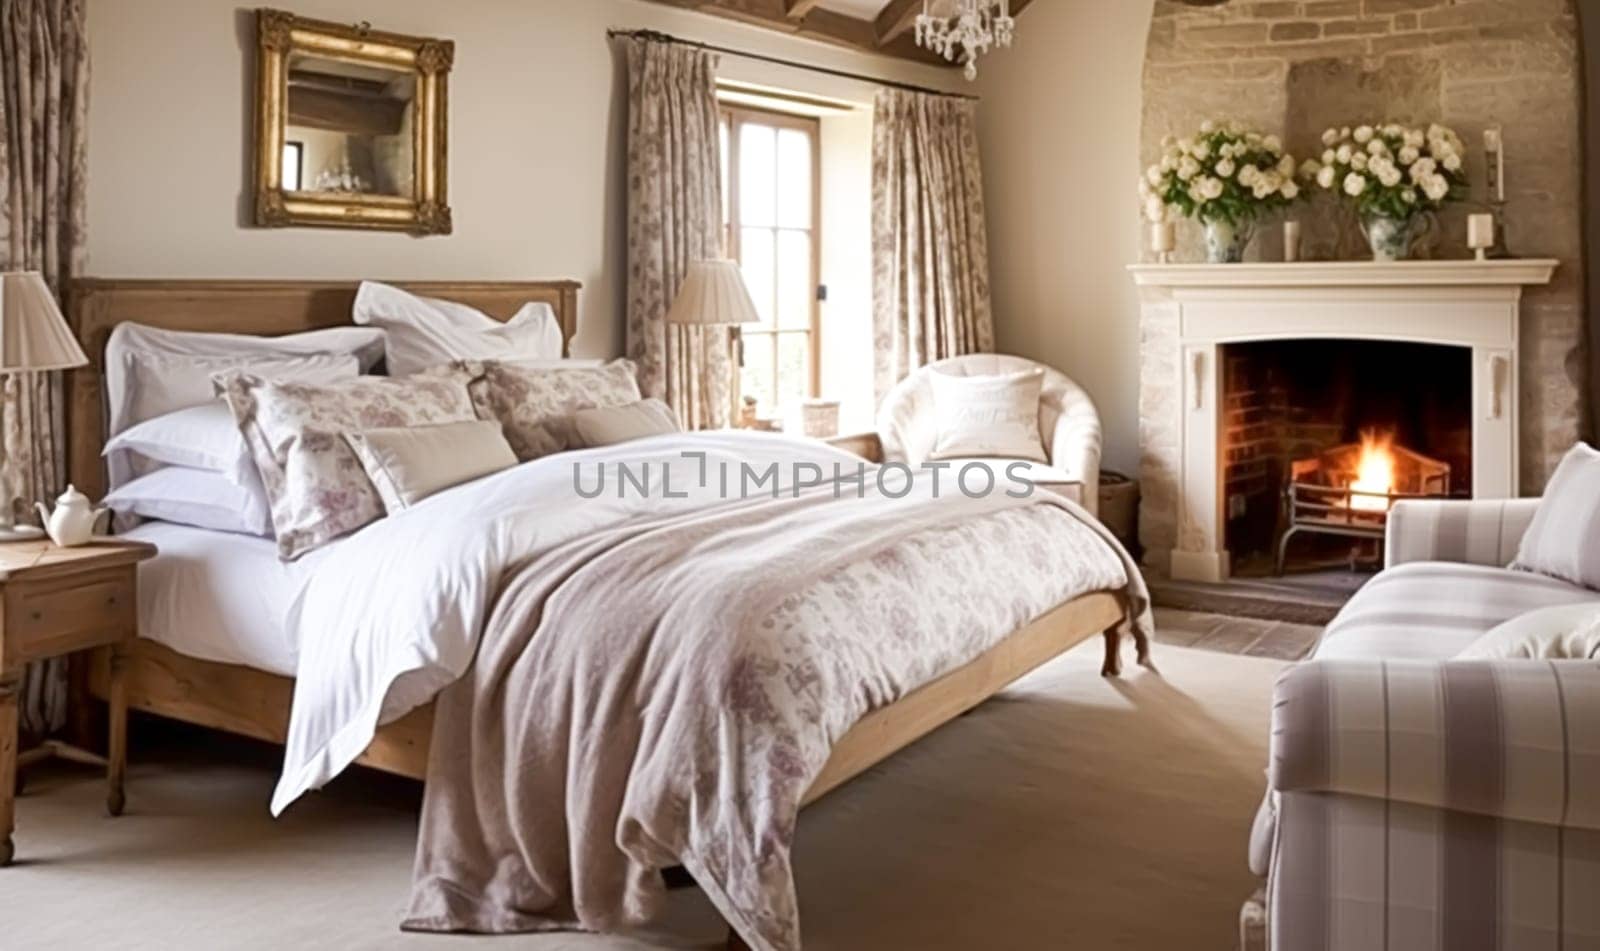 Bedroom decor, interior design and holiday rental, classic bed with elegant plush bedding and furniture, English country house and cottage style idea